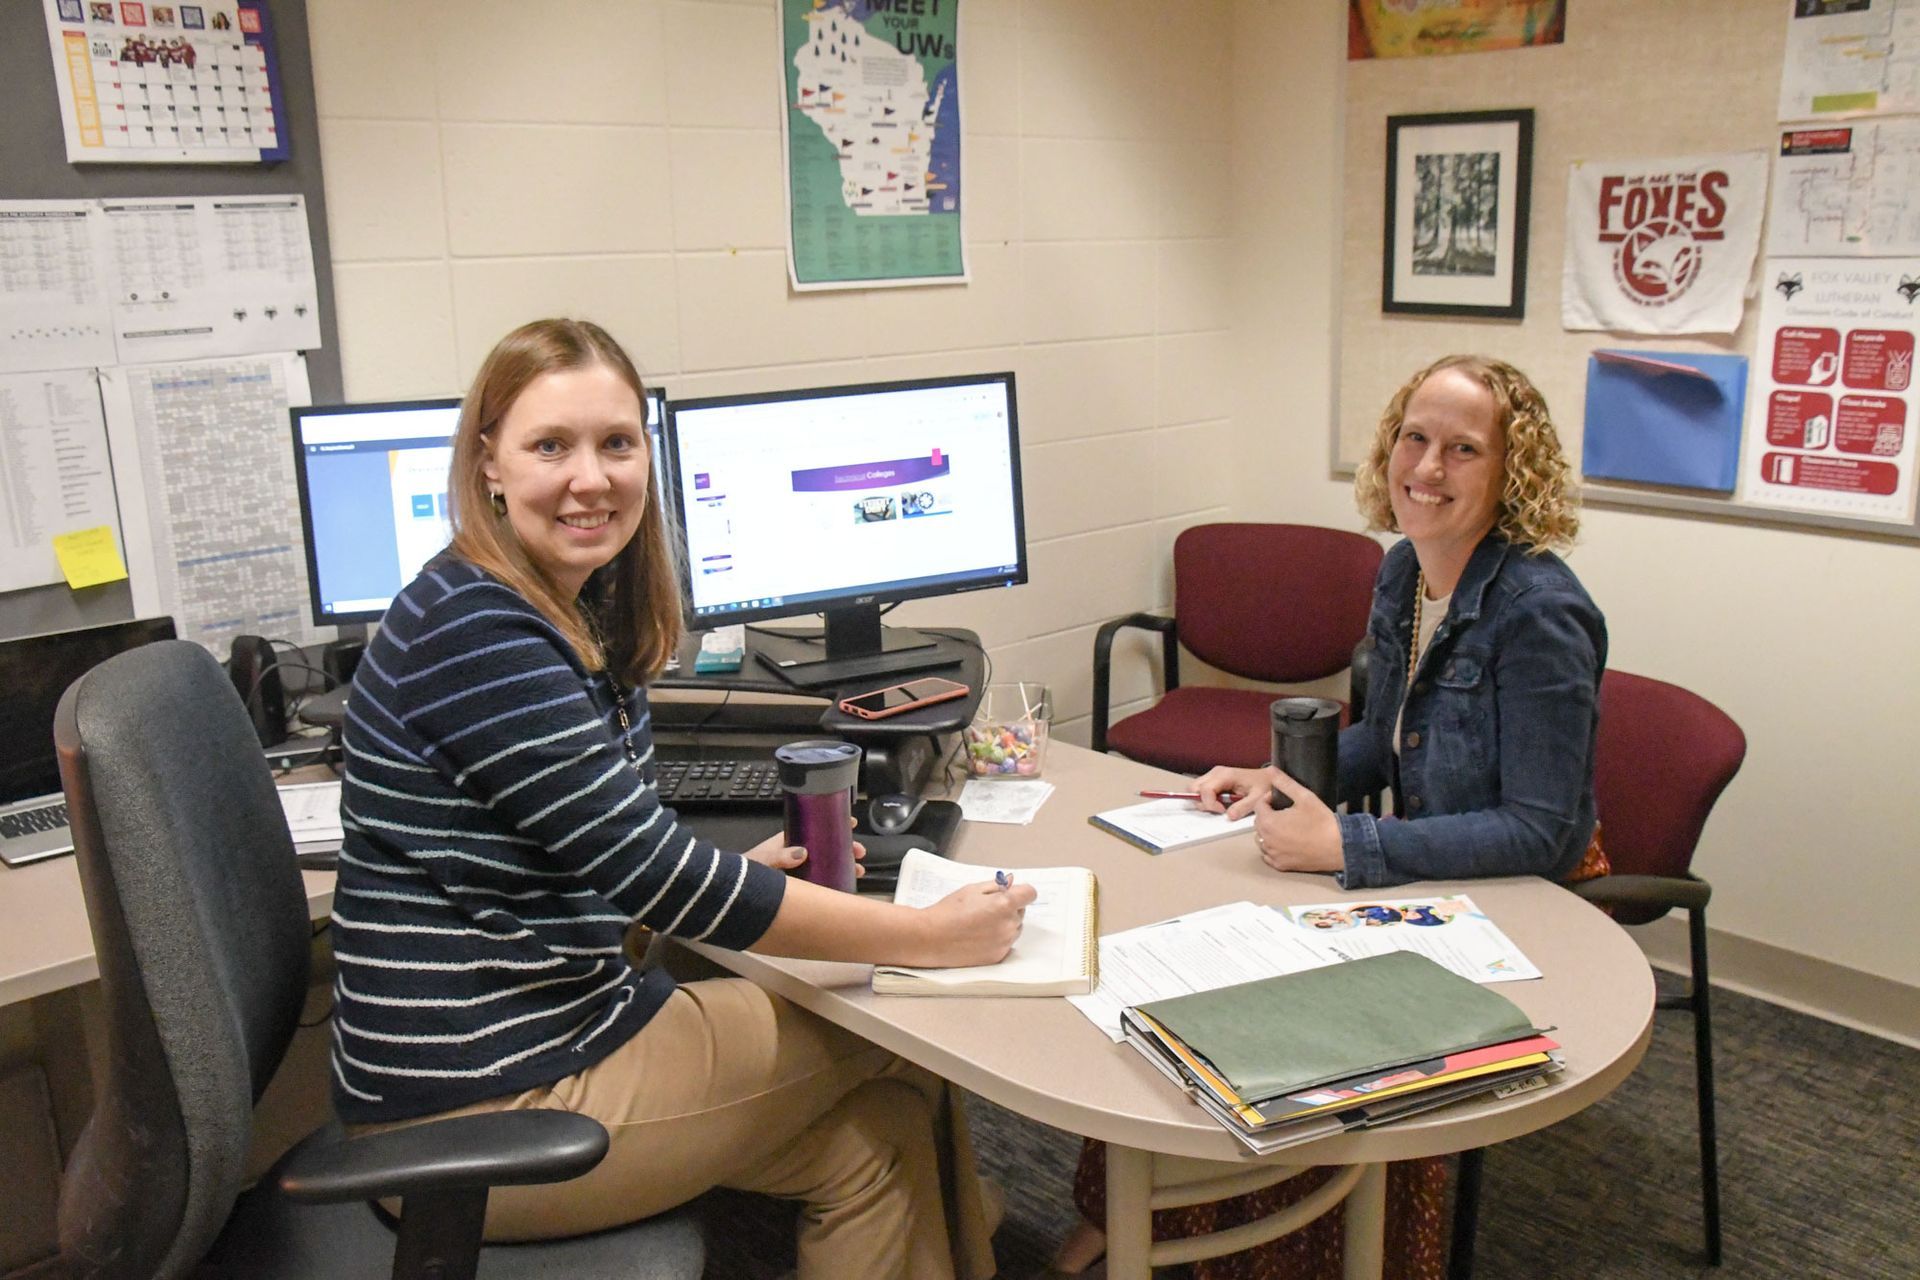 Aleay Friemark sitting at her desk with Heidi Wendland on the other side of the desk. Both of them are smiling and looking at the camera.